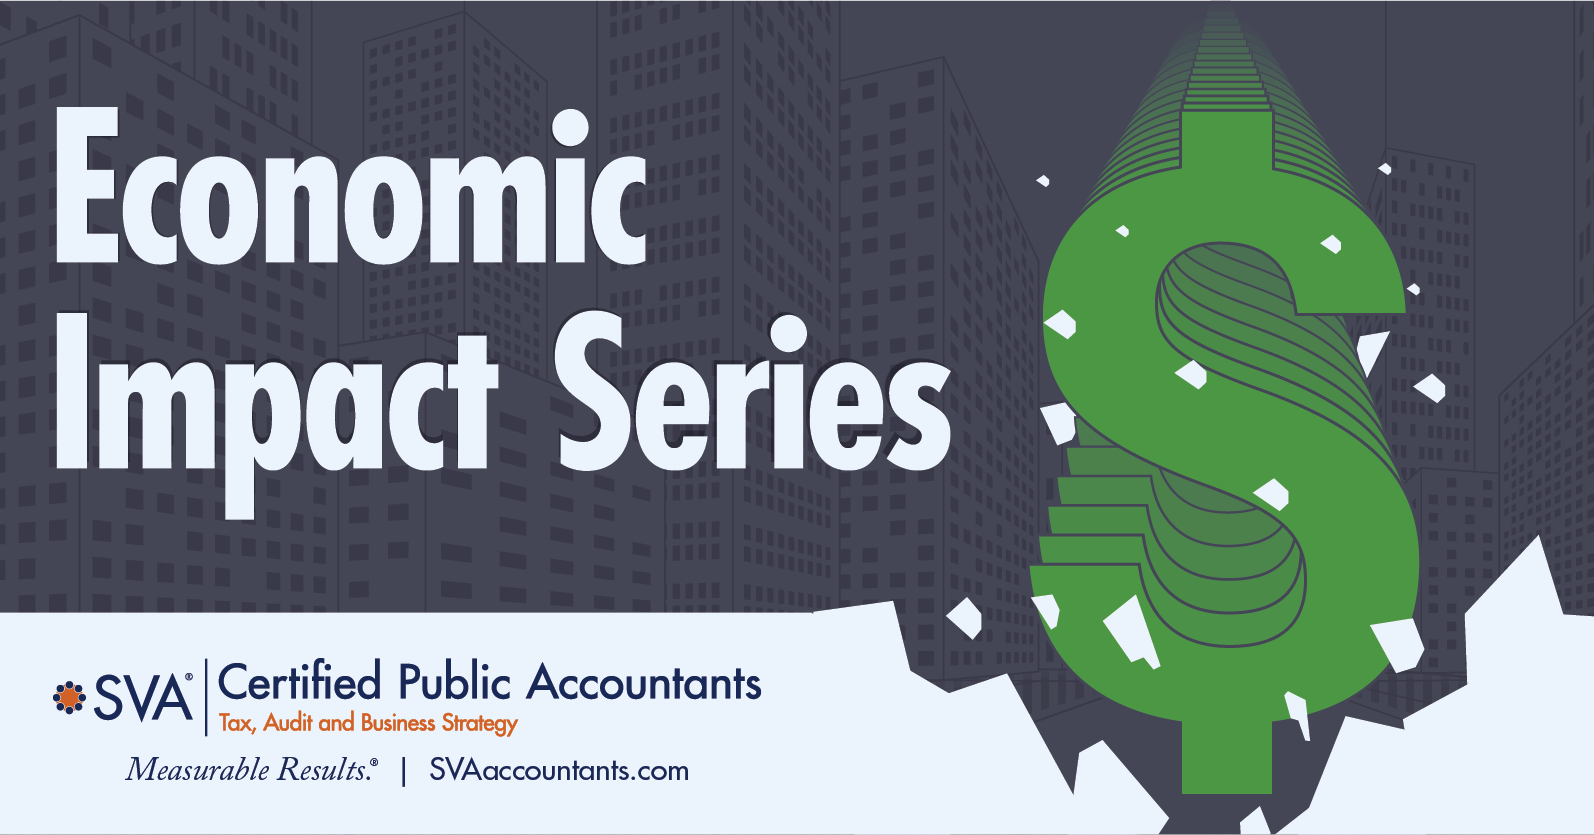 Economic Impact Series: Part III: Why Valuations Are an Important Tool Now 